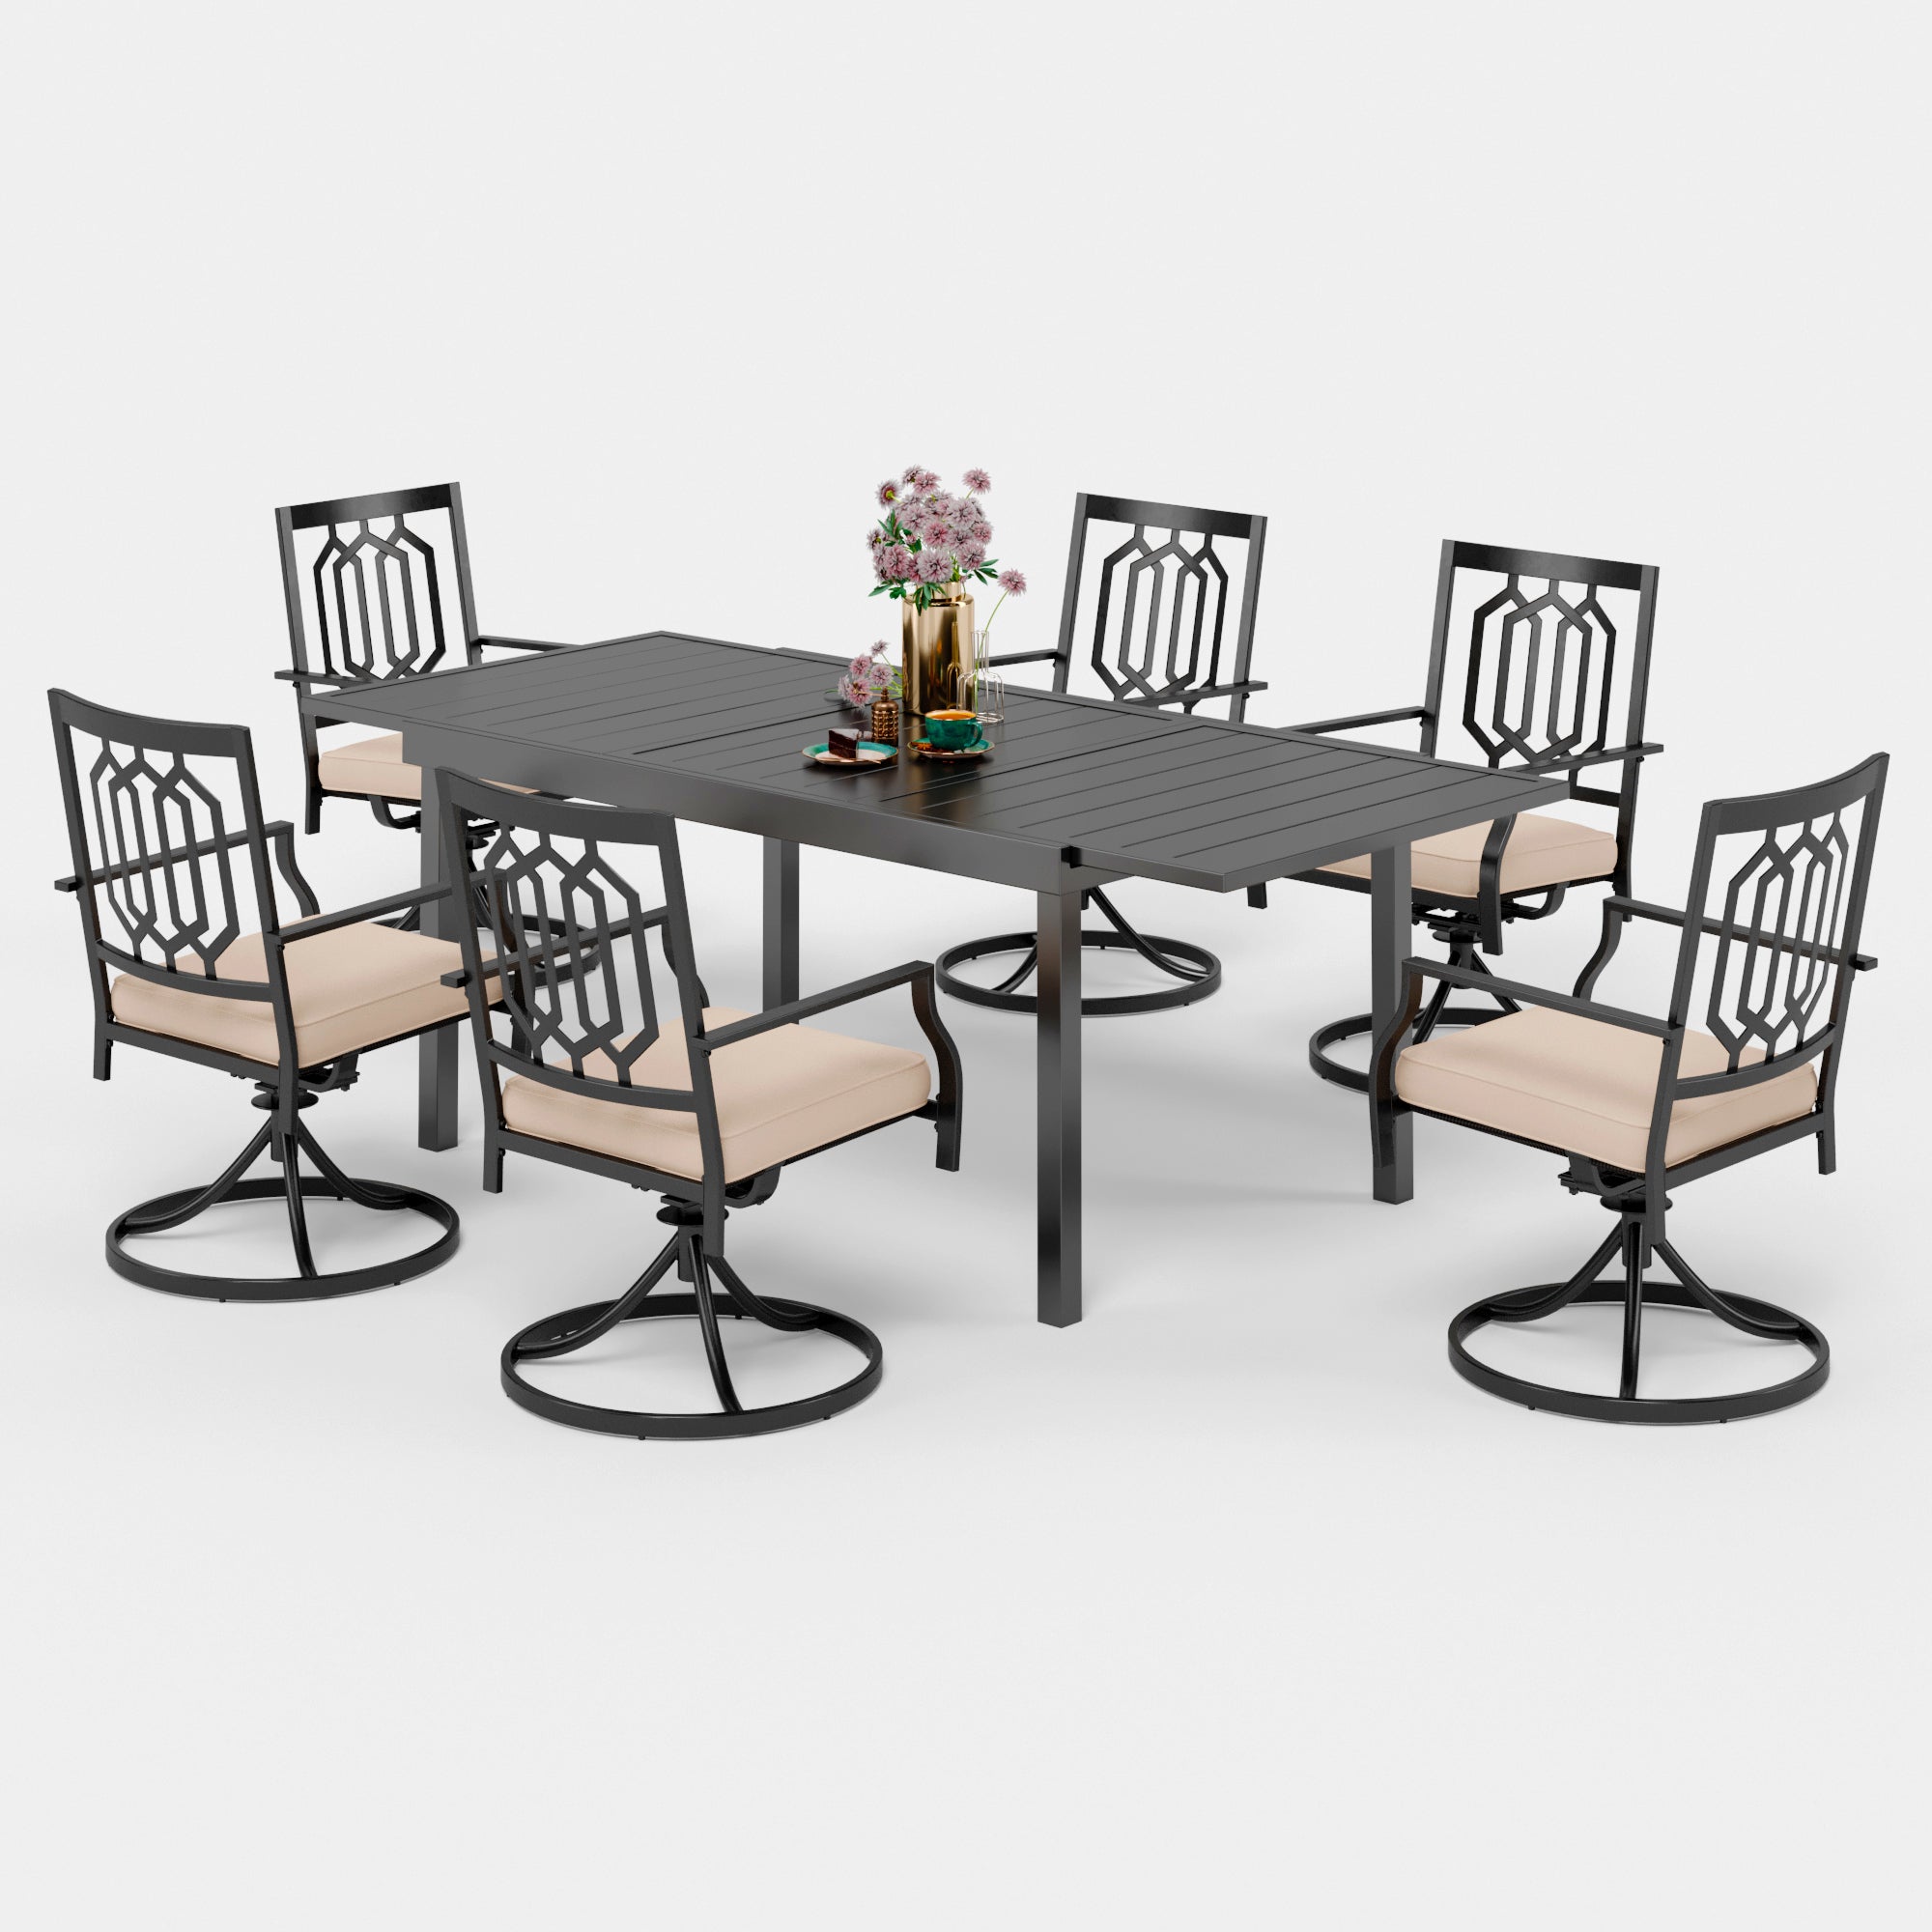 PHI VILLA Adjustable Patio Table and Cushioned Swivel Chairs Large Metal Outdoor Patio Dining Sets